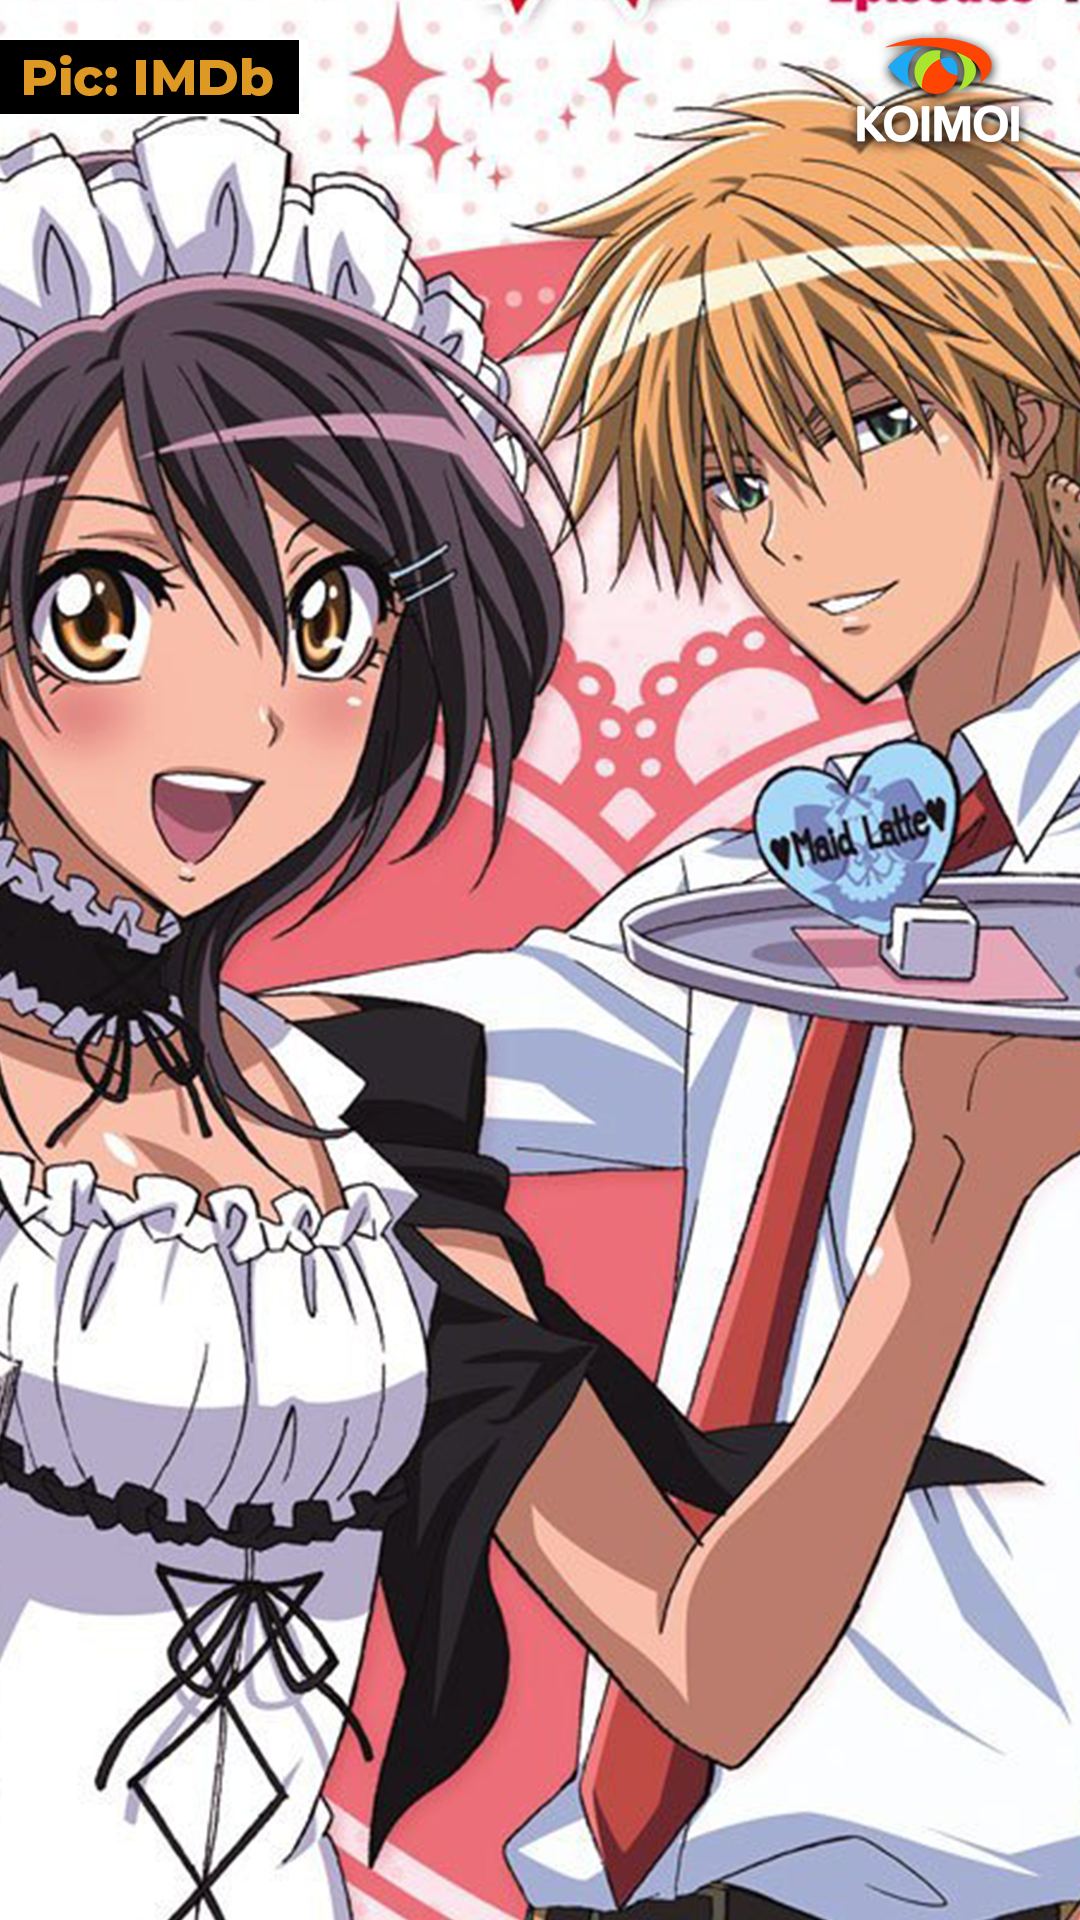 Here Are Best Anime Couples Of All Time - Koimoi